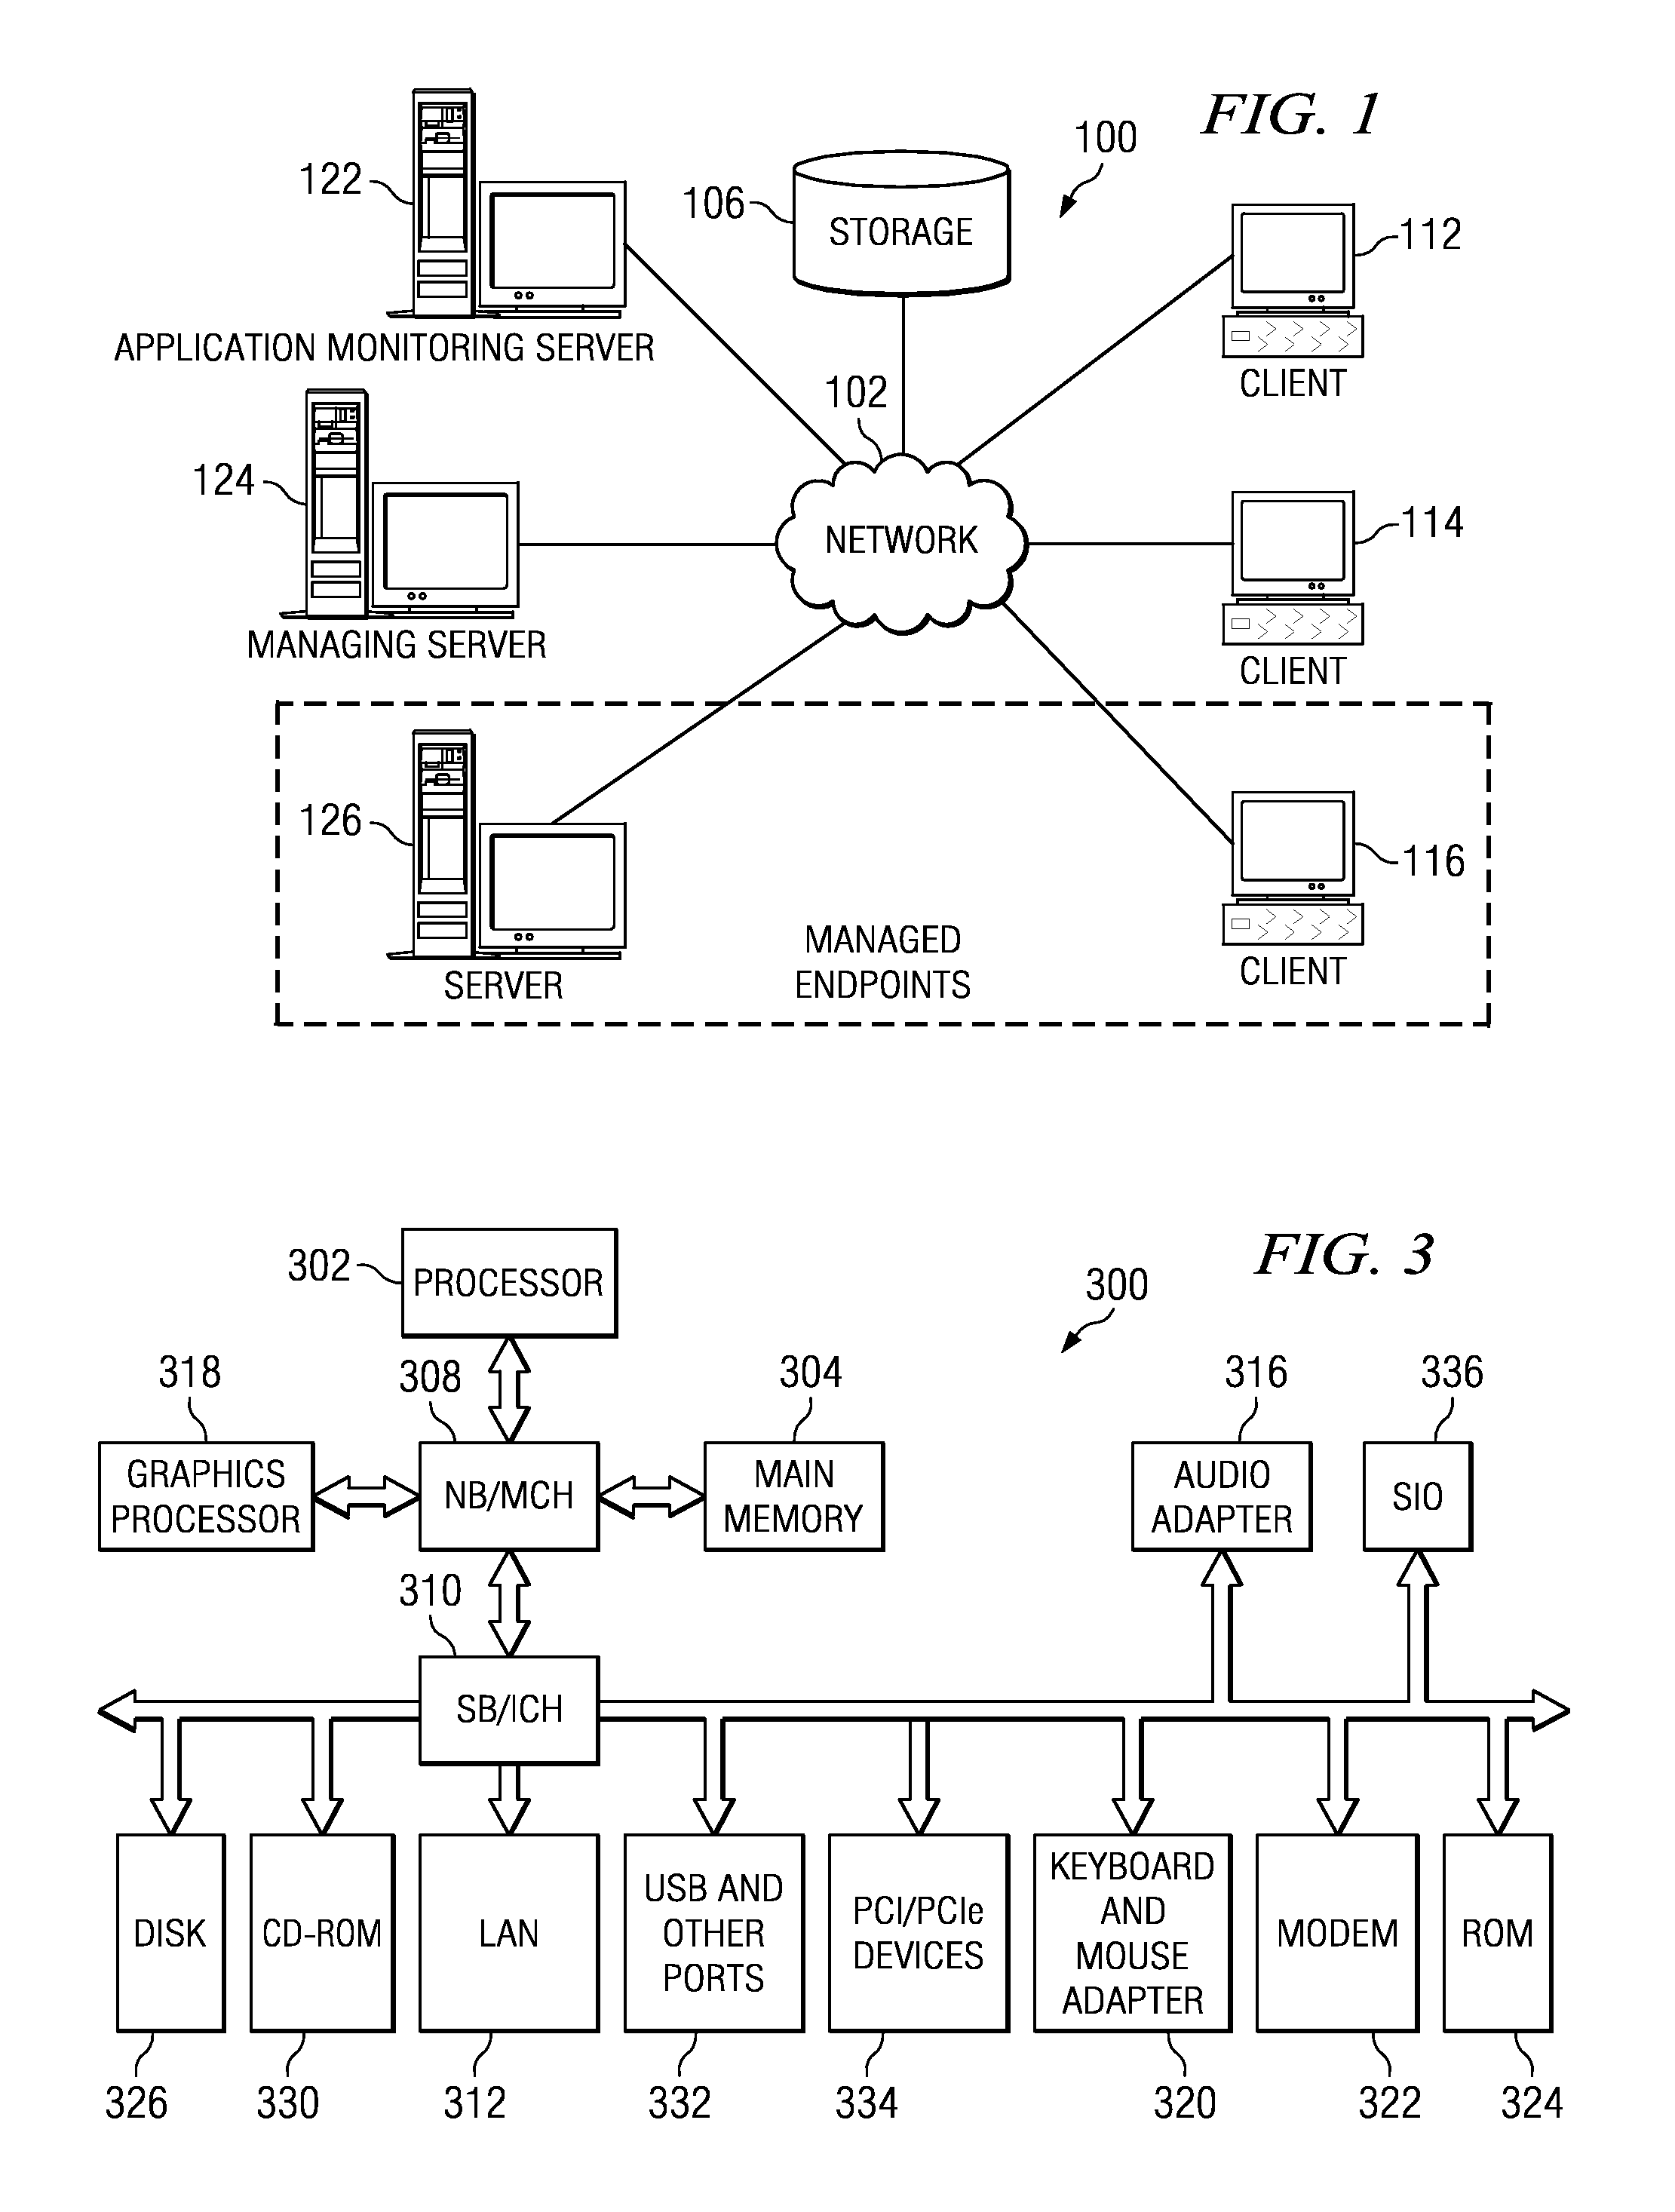 Method, apparatus, and program product for autonomic patch deployment based on autonomic patch risk assessment and policies